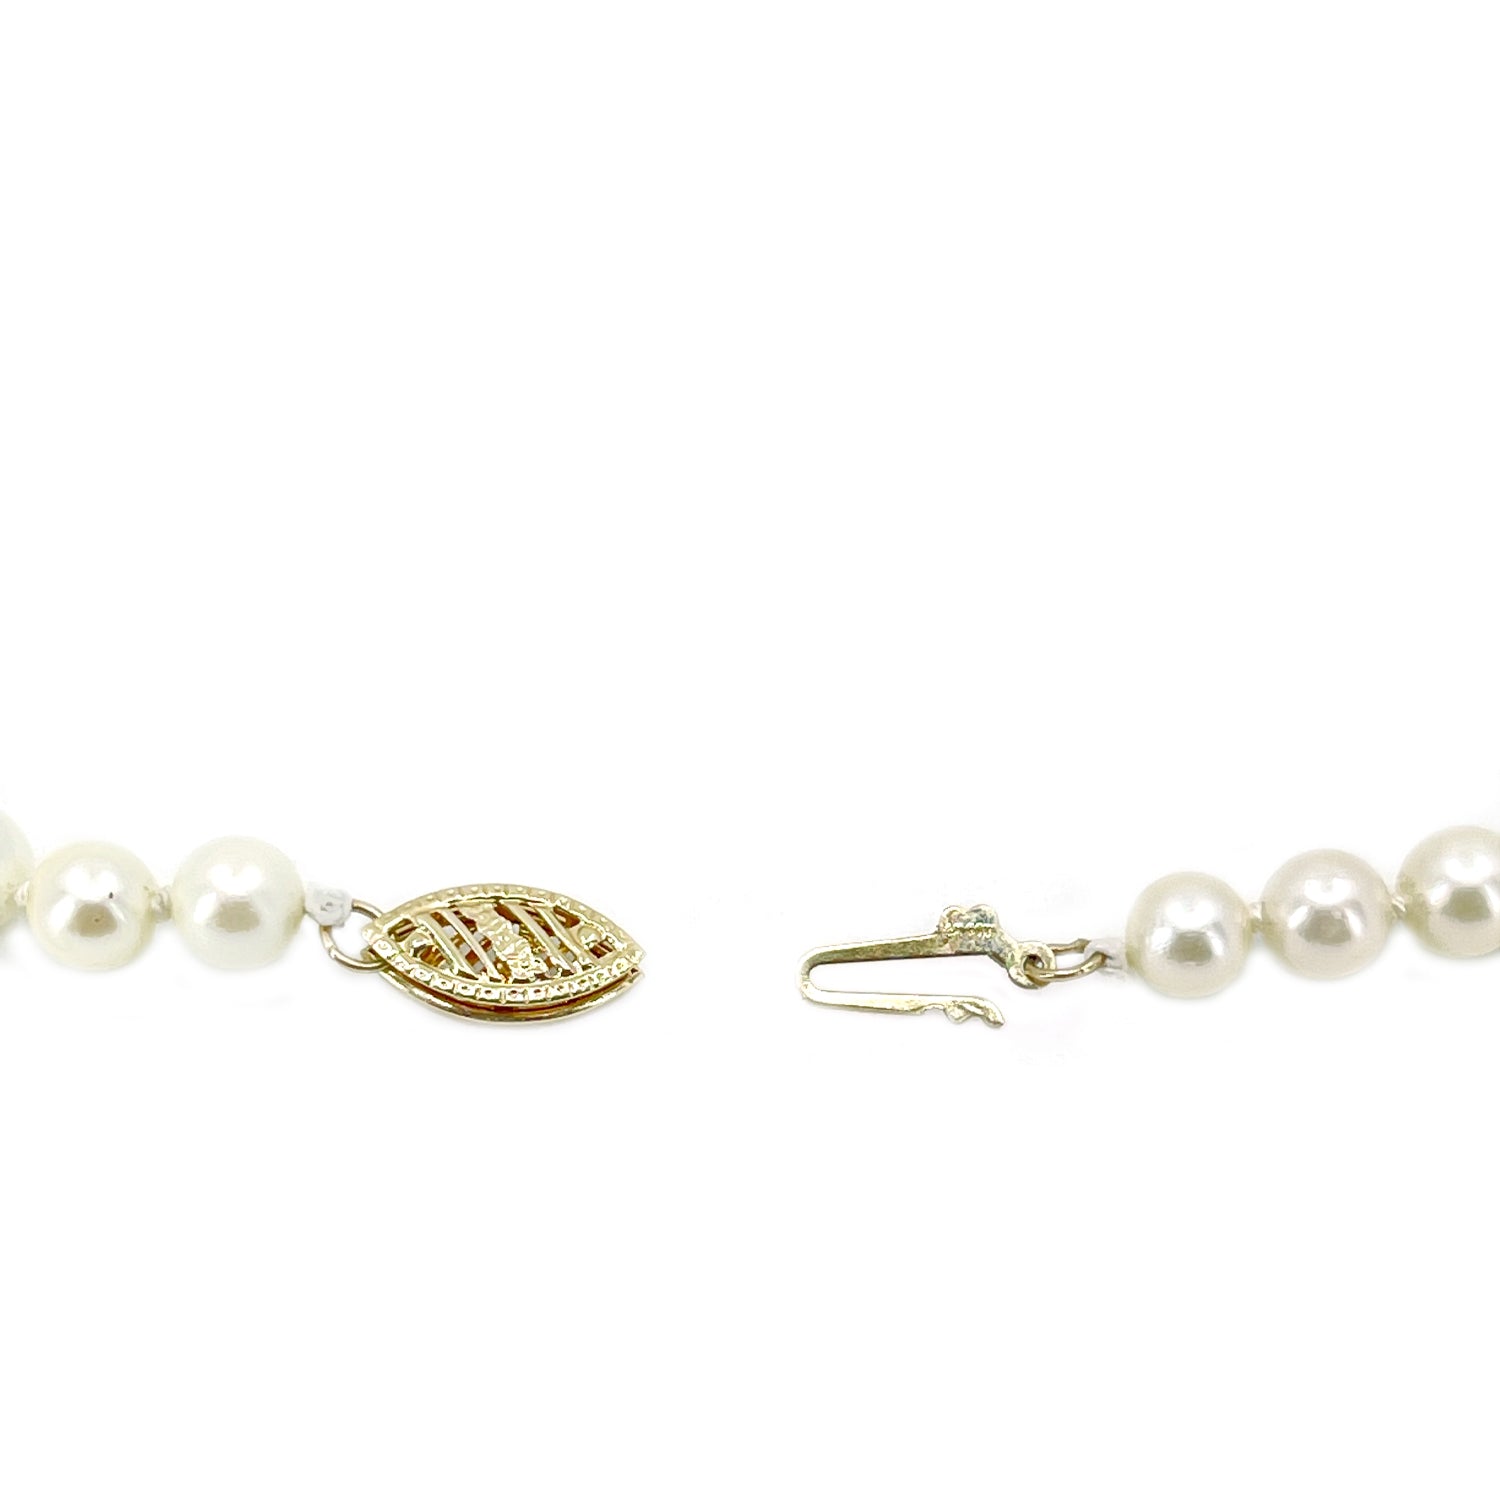 Estate Mid-Century Japanese Cultured Saltwater Akoya Pearl Vintage Necklace - 14K Yellow Gold 19 Inch